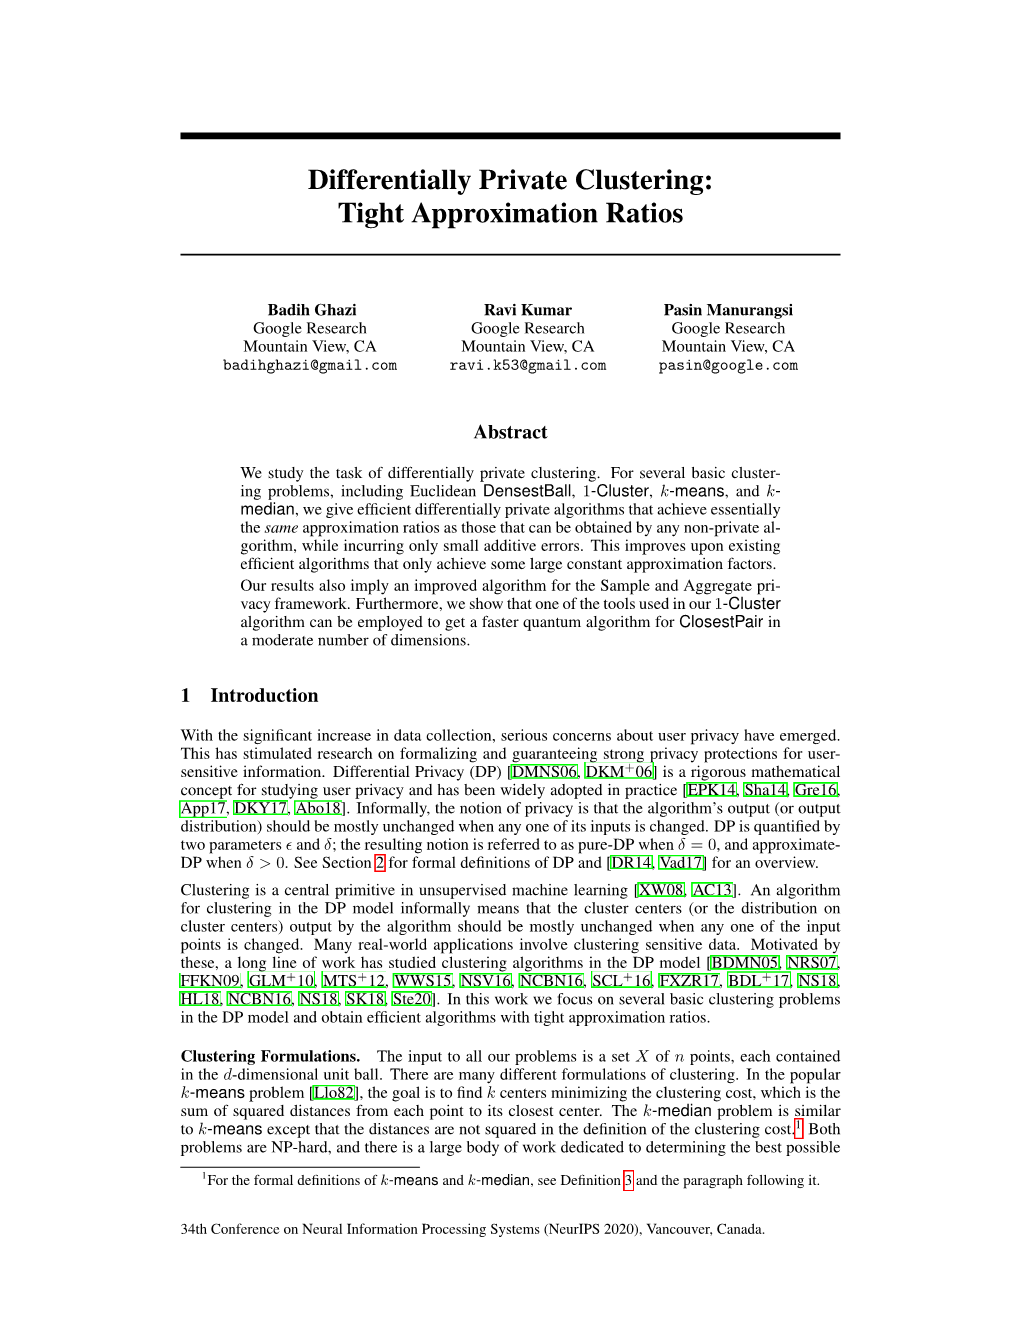 Differentially Private Clustering: Tight Approximation Ratios